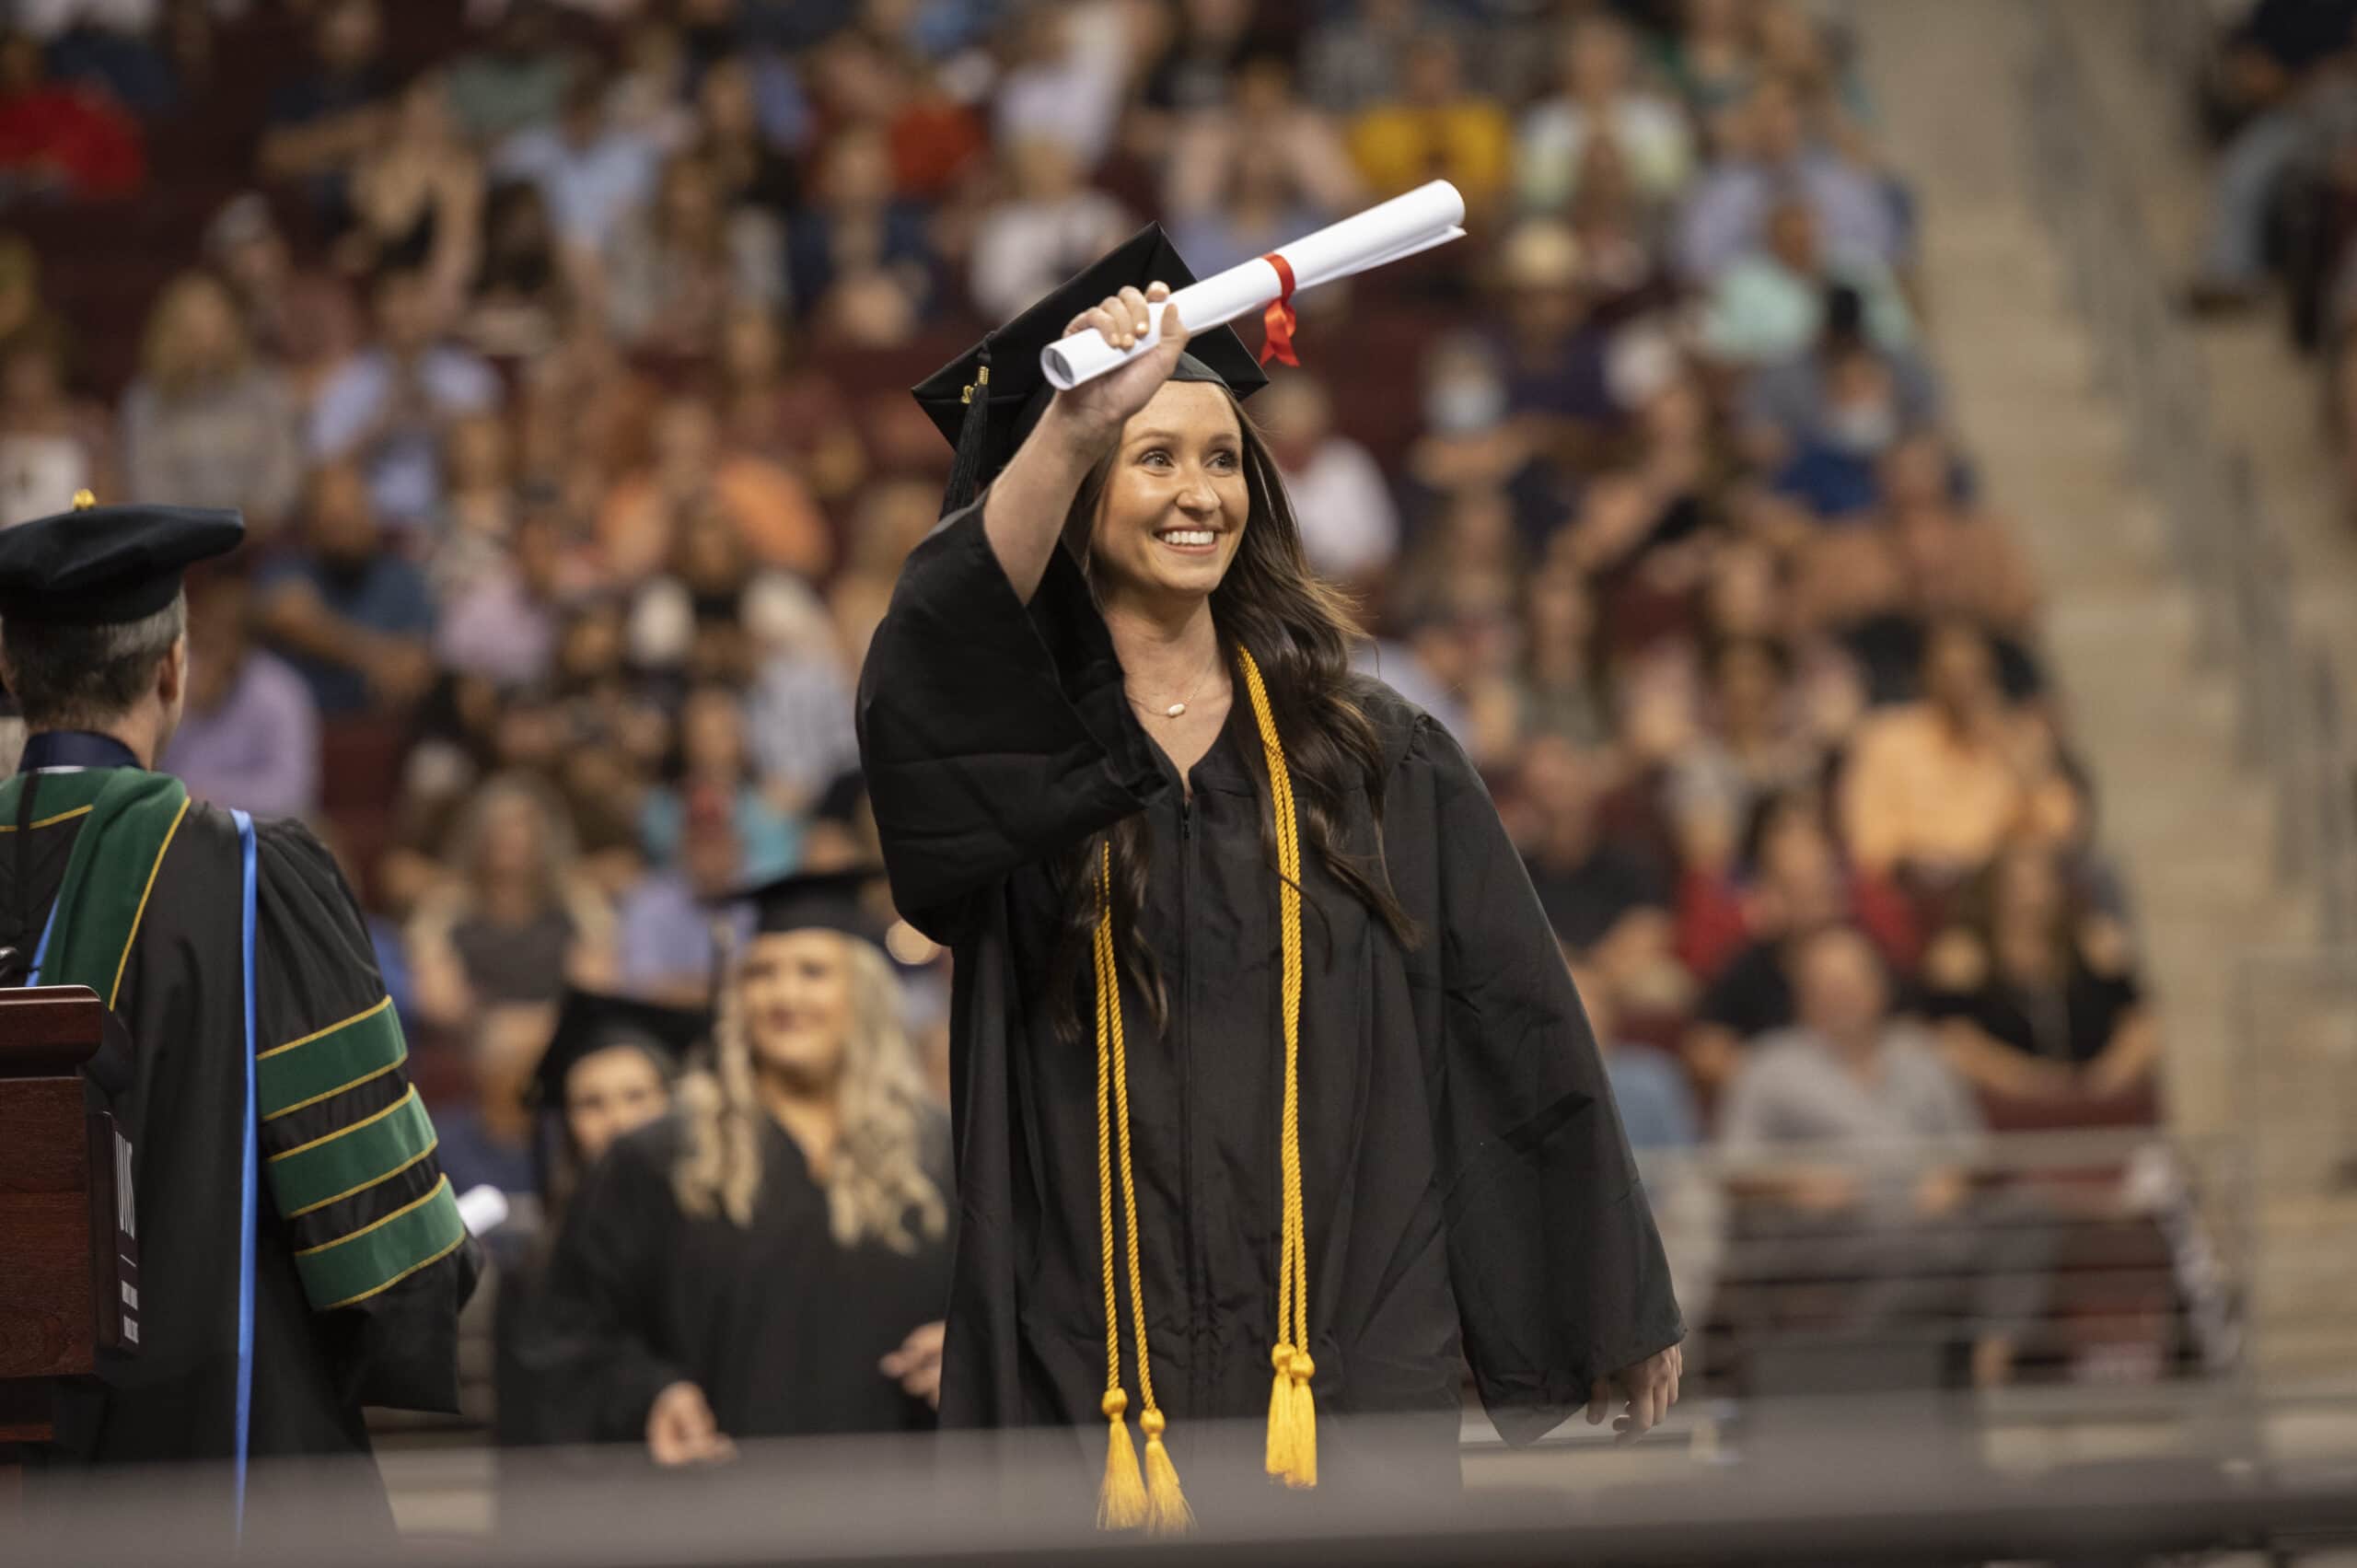 Degrees and certificates were conferred to 942 graduates of the University of Arkansas for Medical Sciences' five colleges and graduate school on May 21.